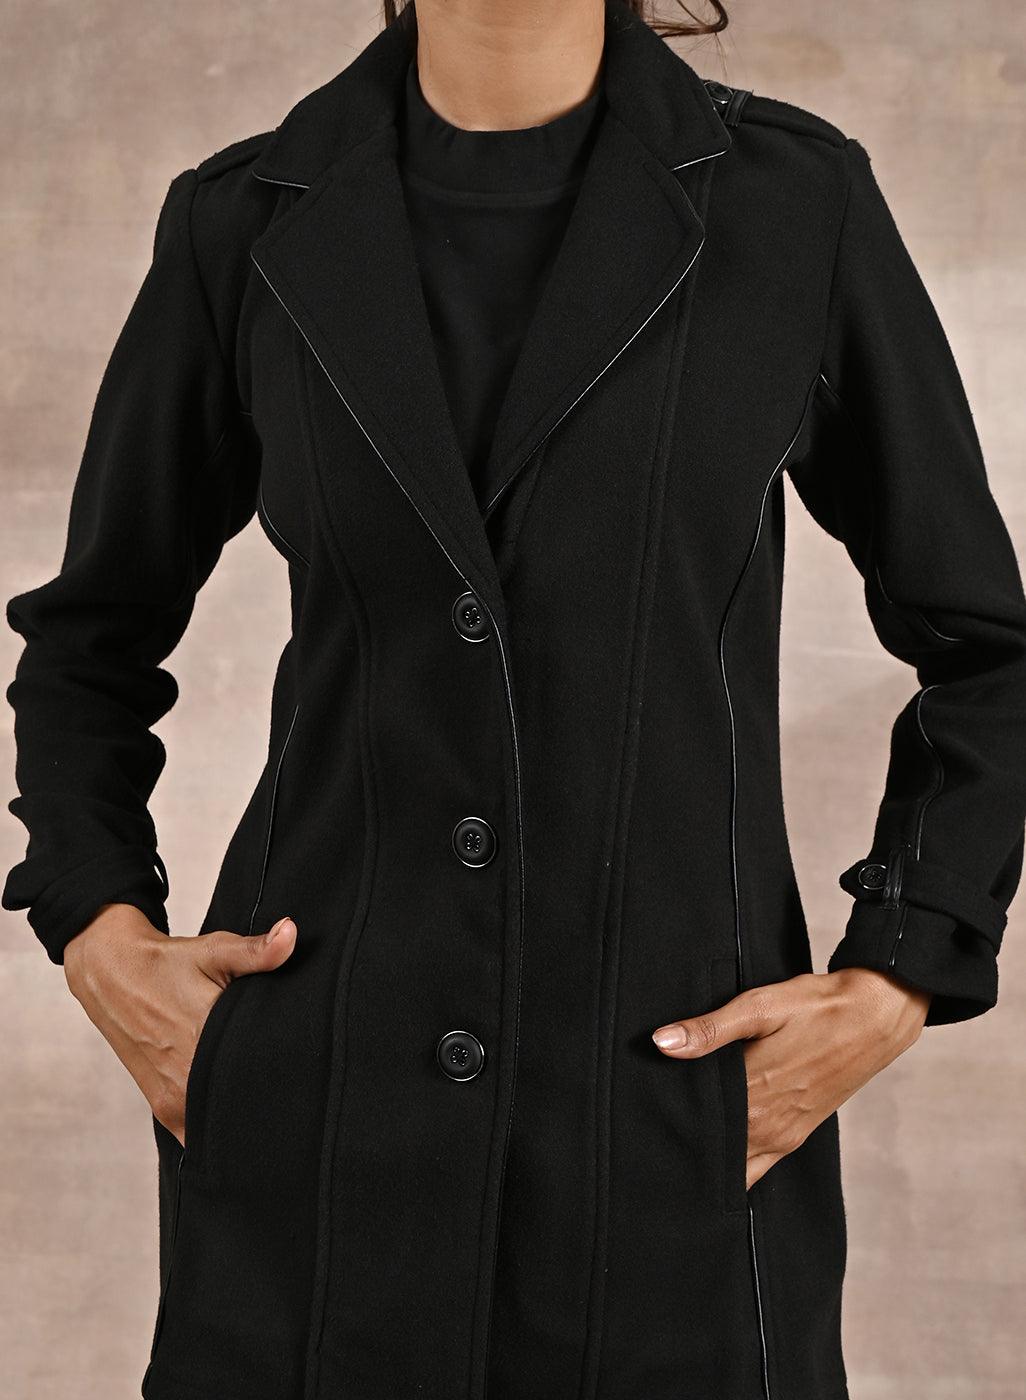 Black Brushed Wool Long Sleeve Coat with Leather Piping - Lakshita